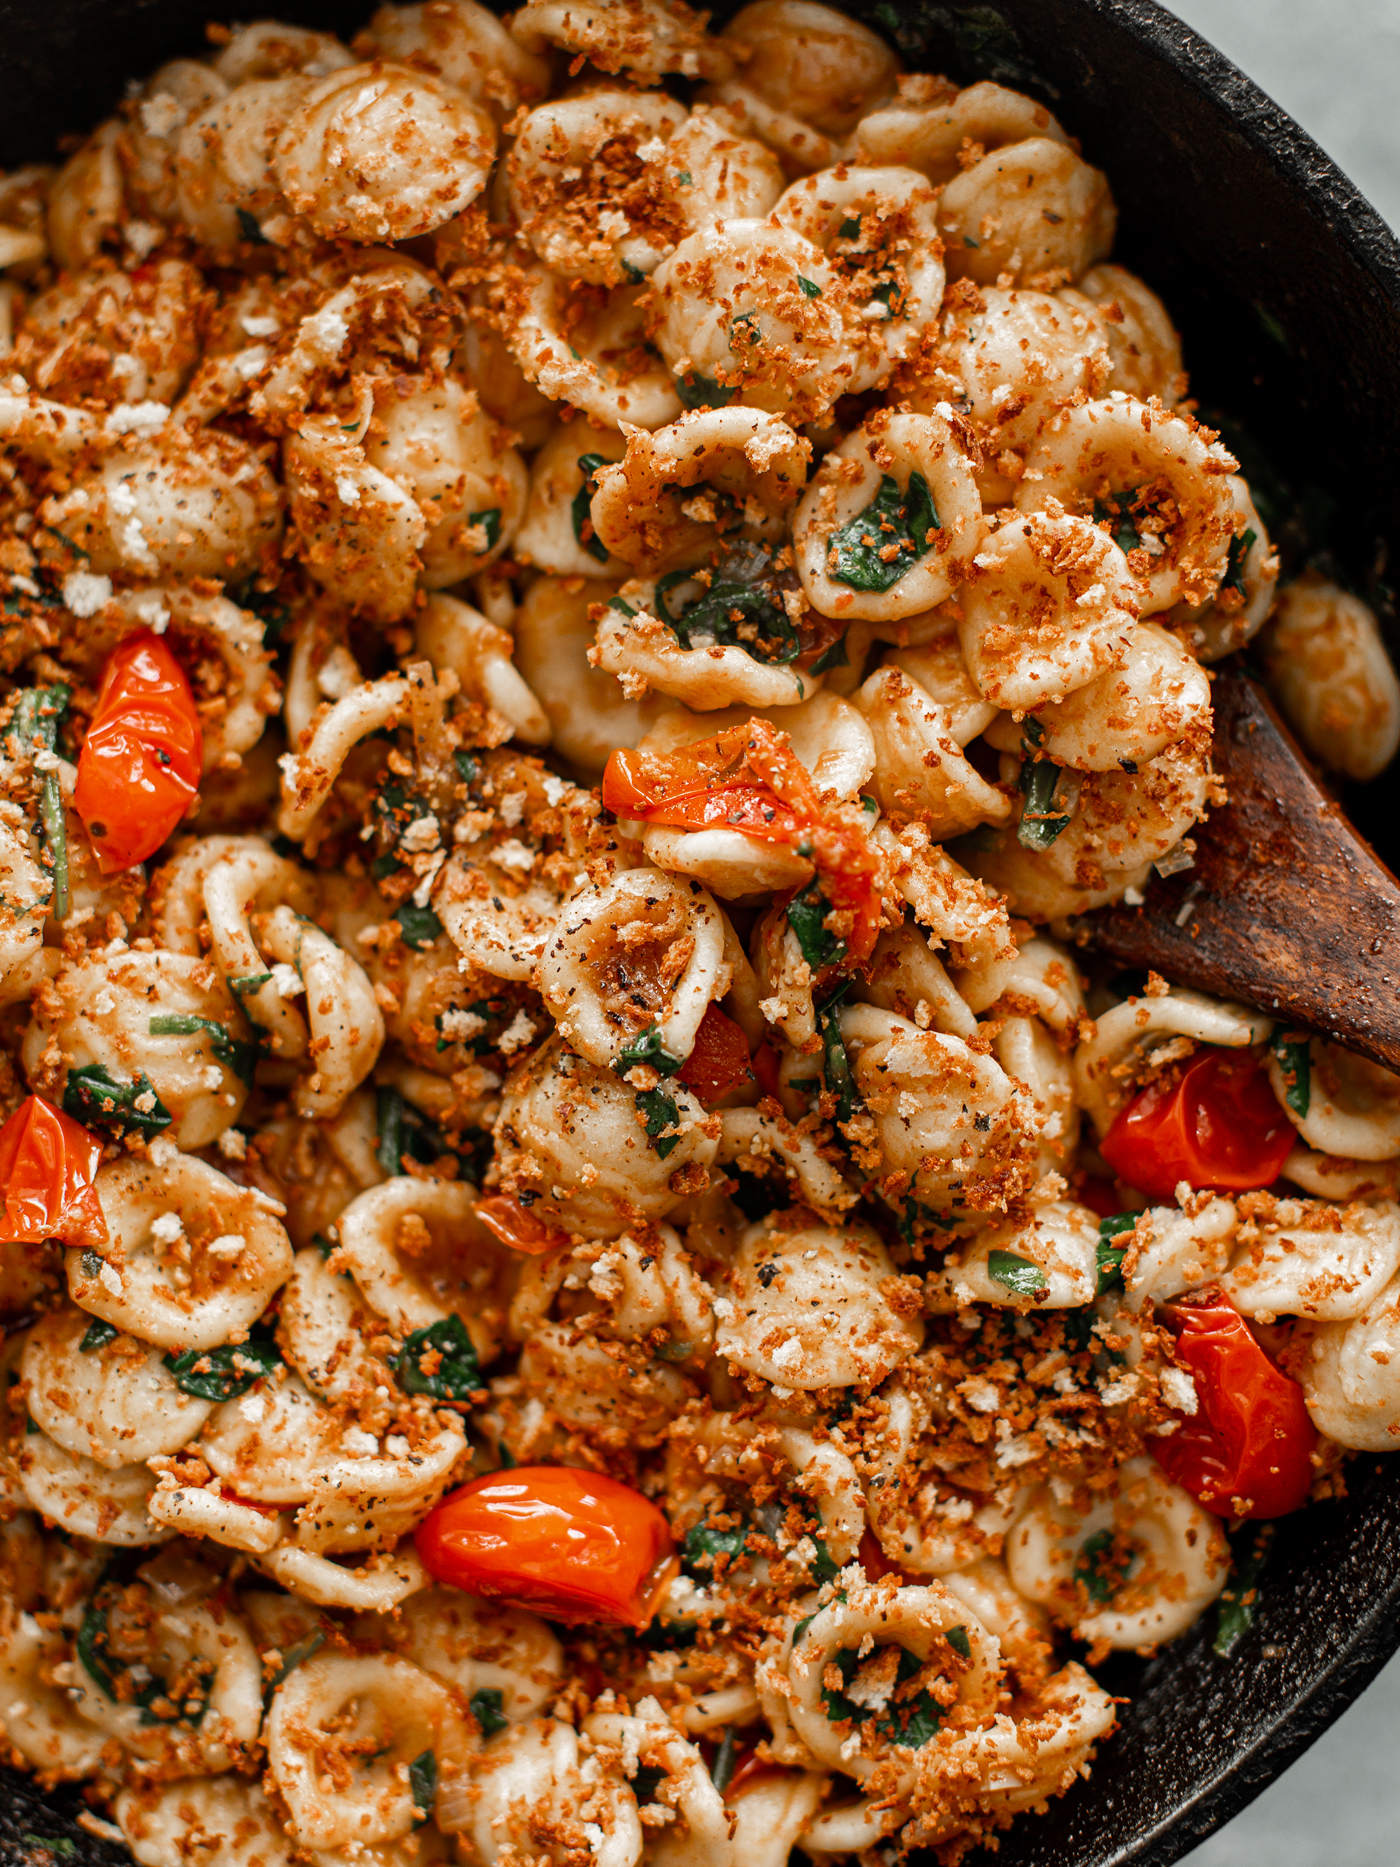 Close up of cooked orecchiette pasta with tomatoes, spinach, and breadcrumbs in a cast iron skillet.